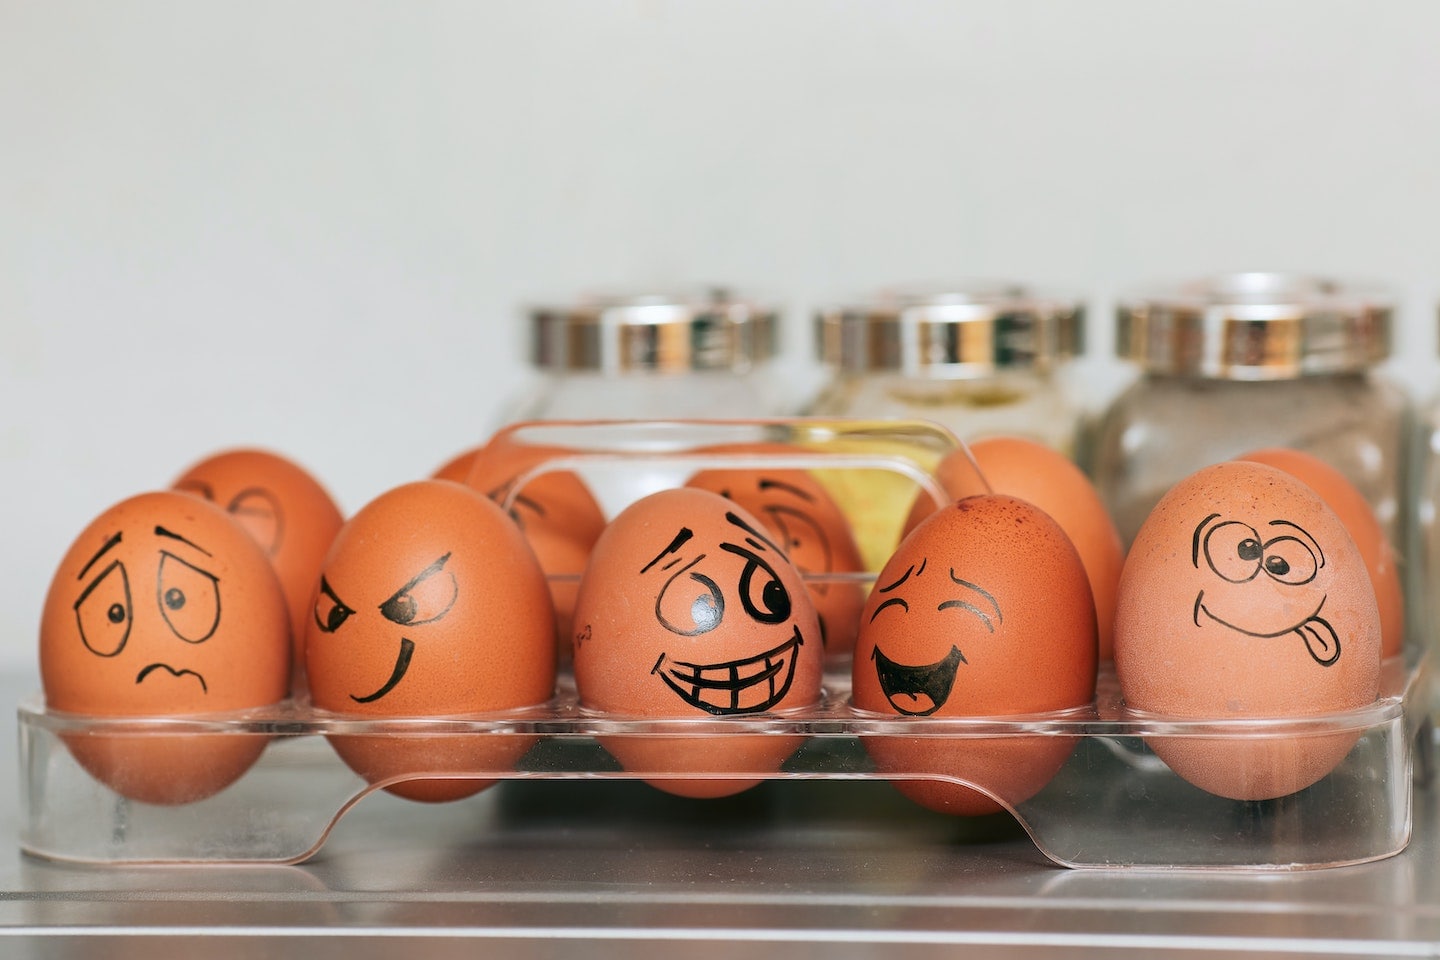 Eggs with faces drawn on them to depict different emotions